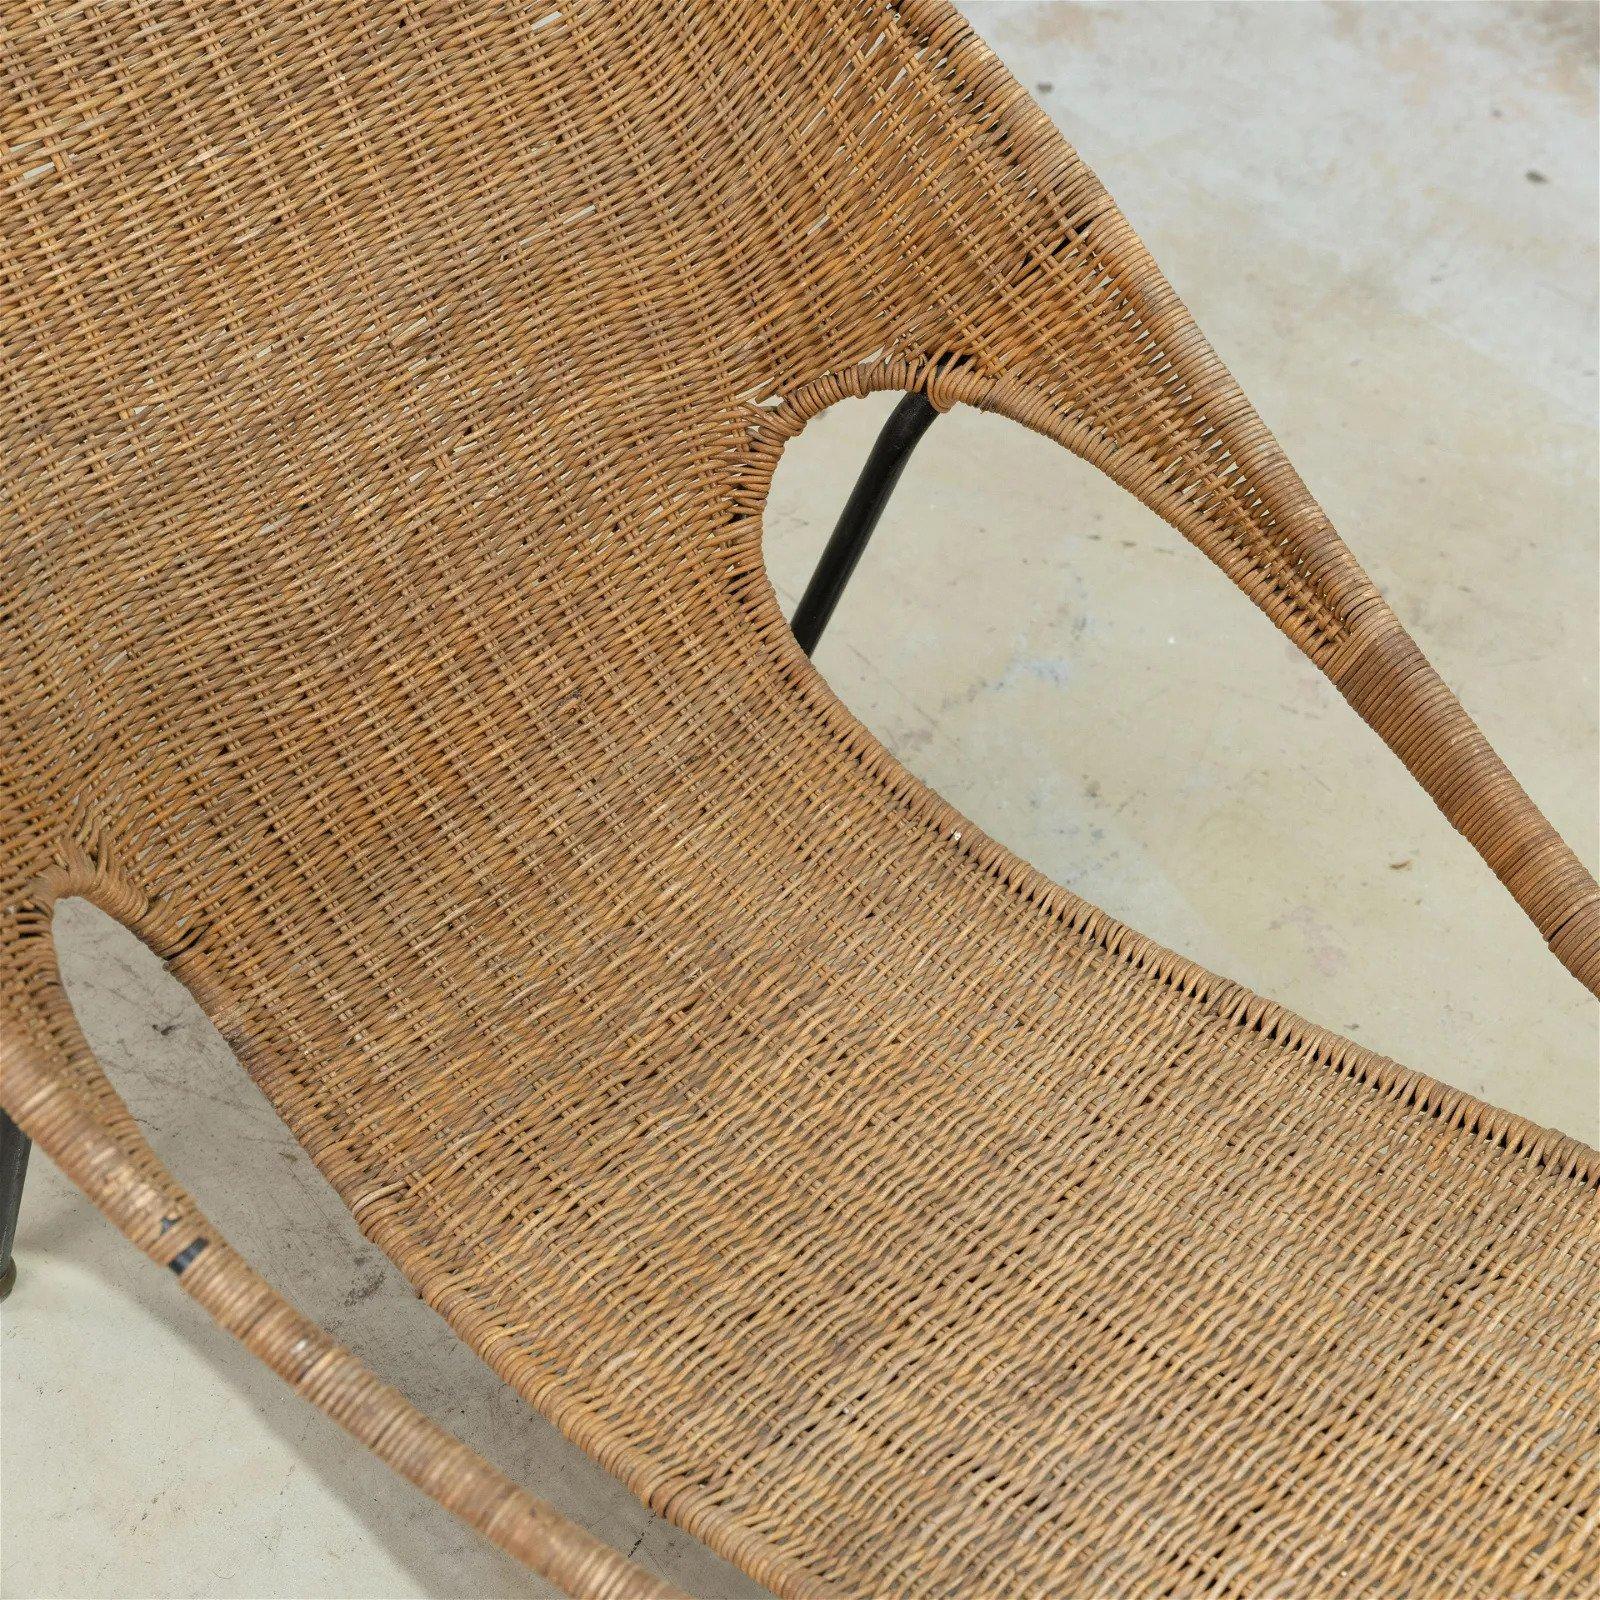 Mid-20th Century Francis Mair Wicker Chaise Lounge